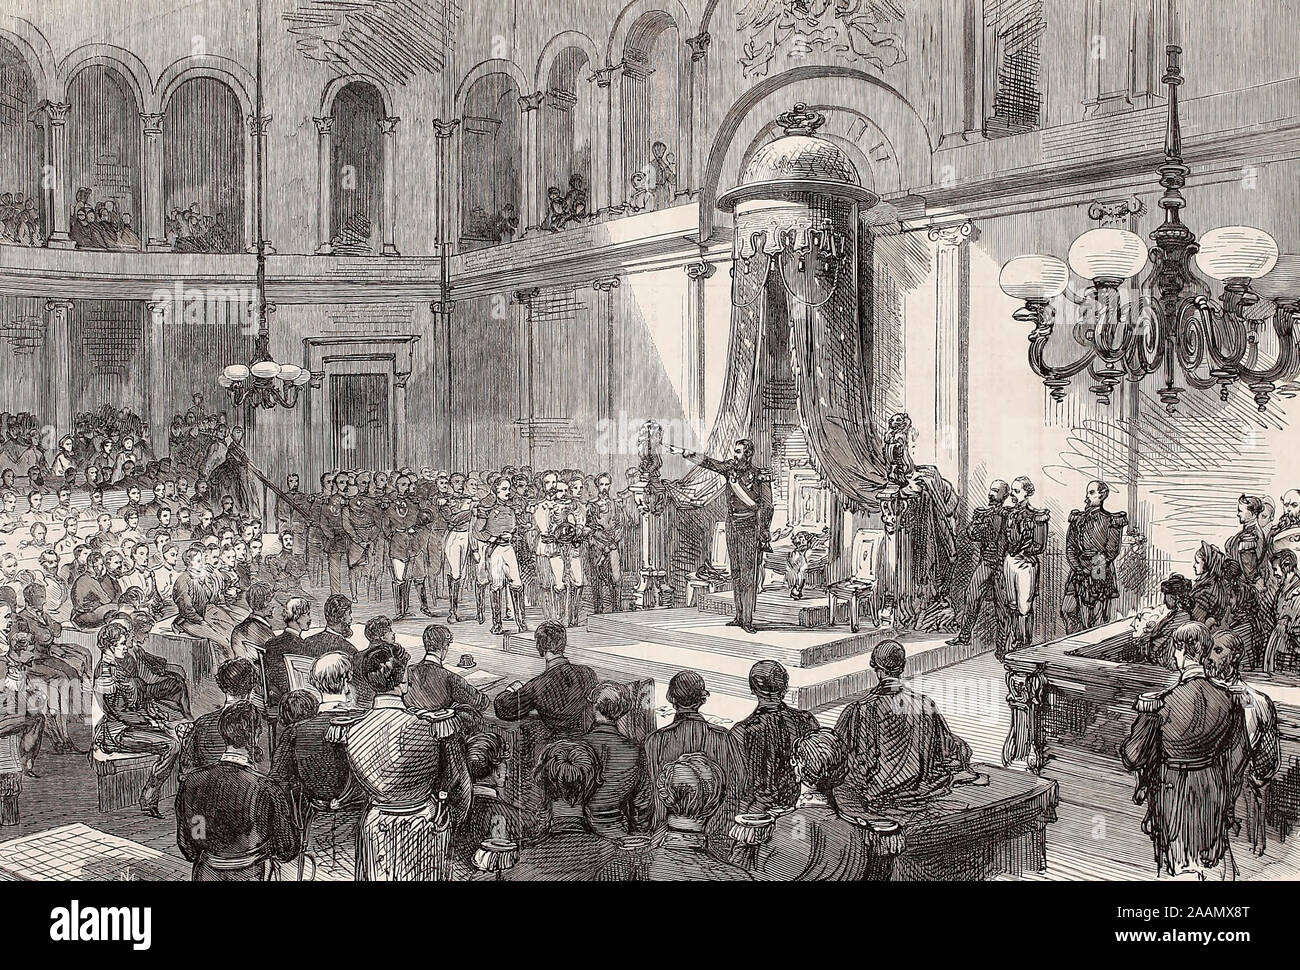 King Leopold II taking the oath before the Belgian Senate and Chamber of Deputies - 1865 Stock Photo